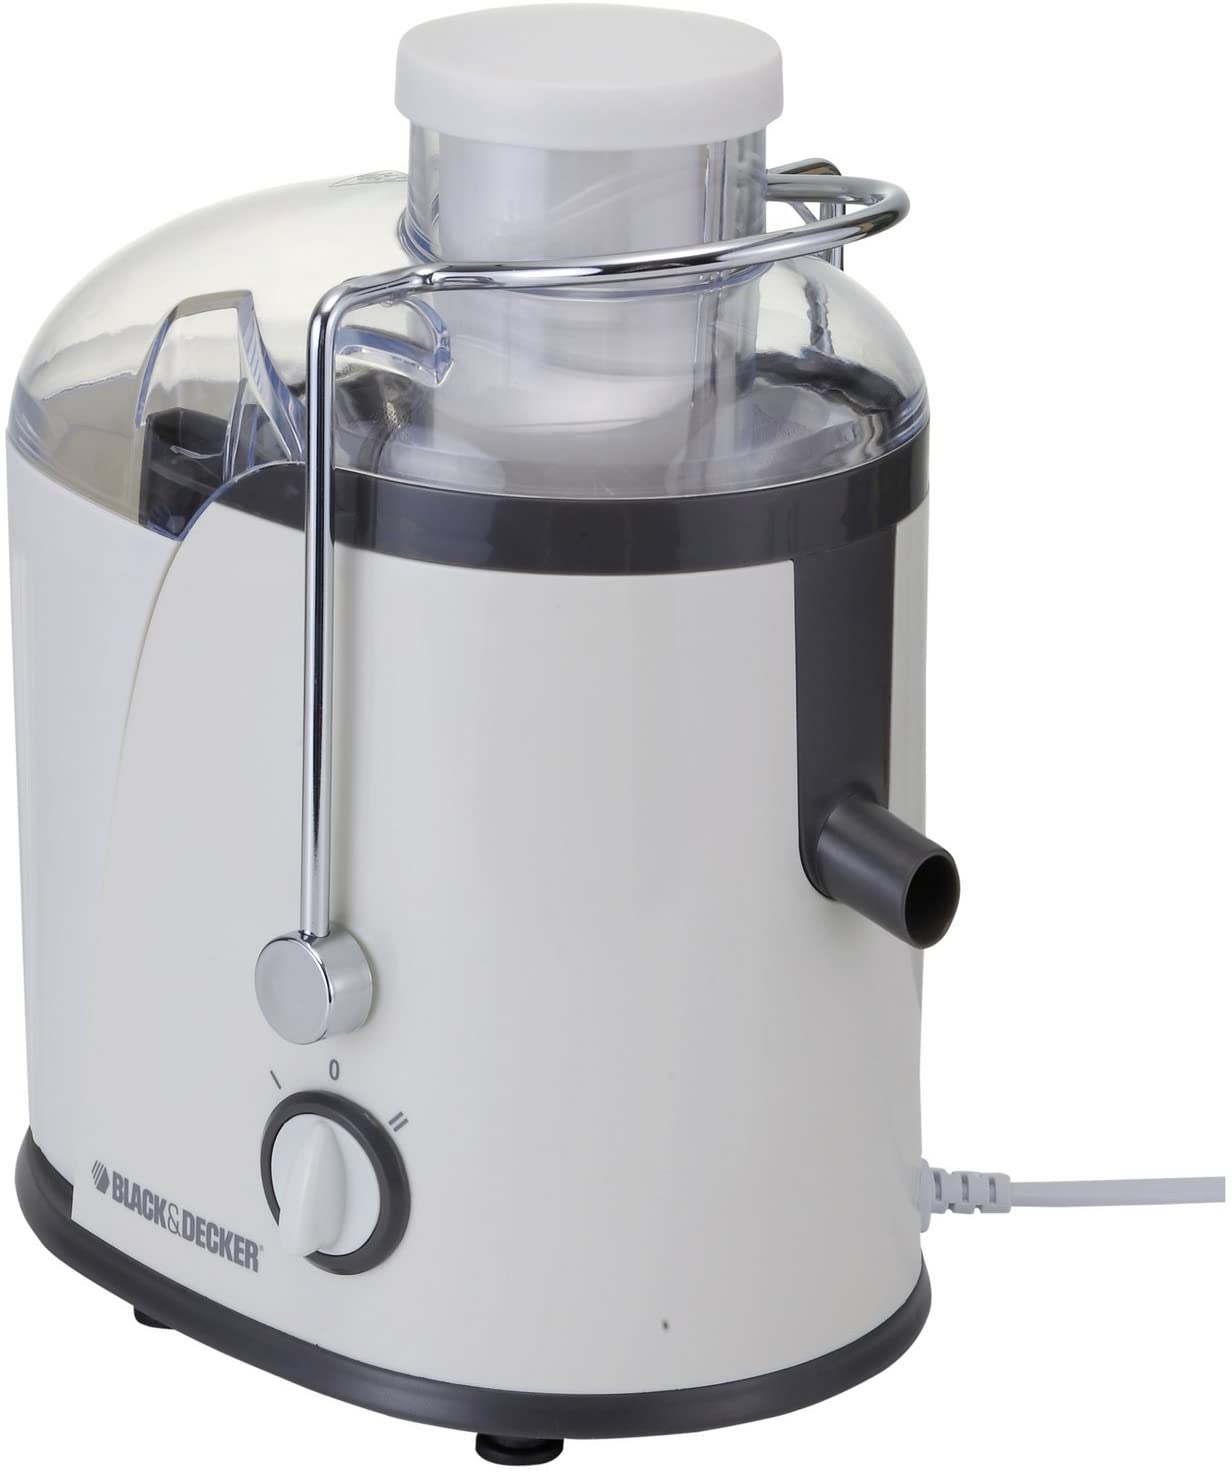 Black & Decker JE400-B5 400W Juice Extractor with wide chute